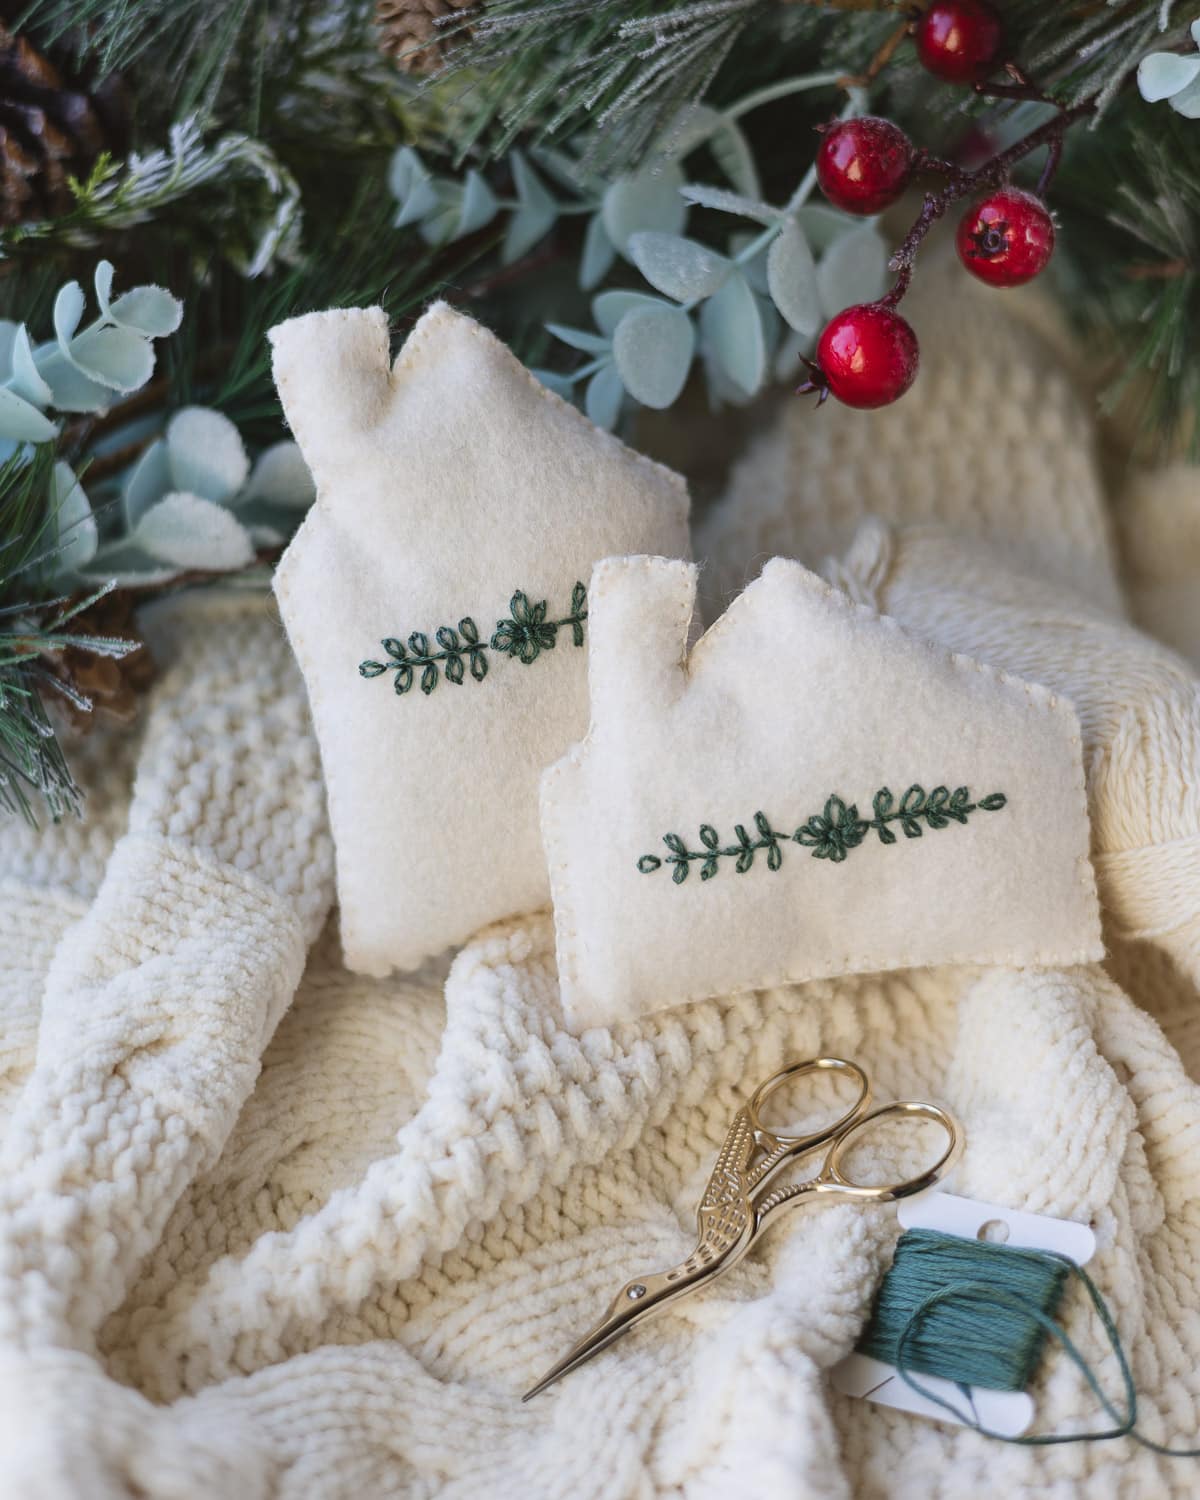 Two white felt house ornaments with a pair of gold embroidery scissors and a spool of green embroidery floss.